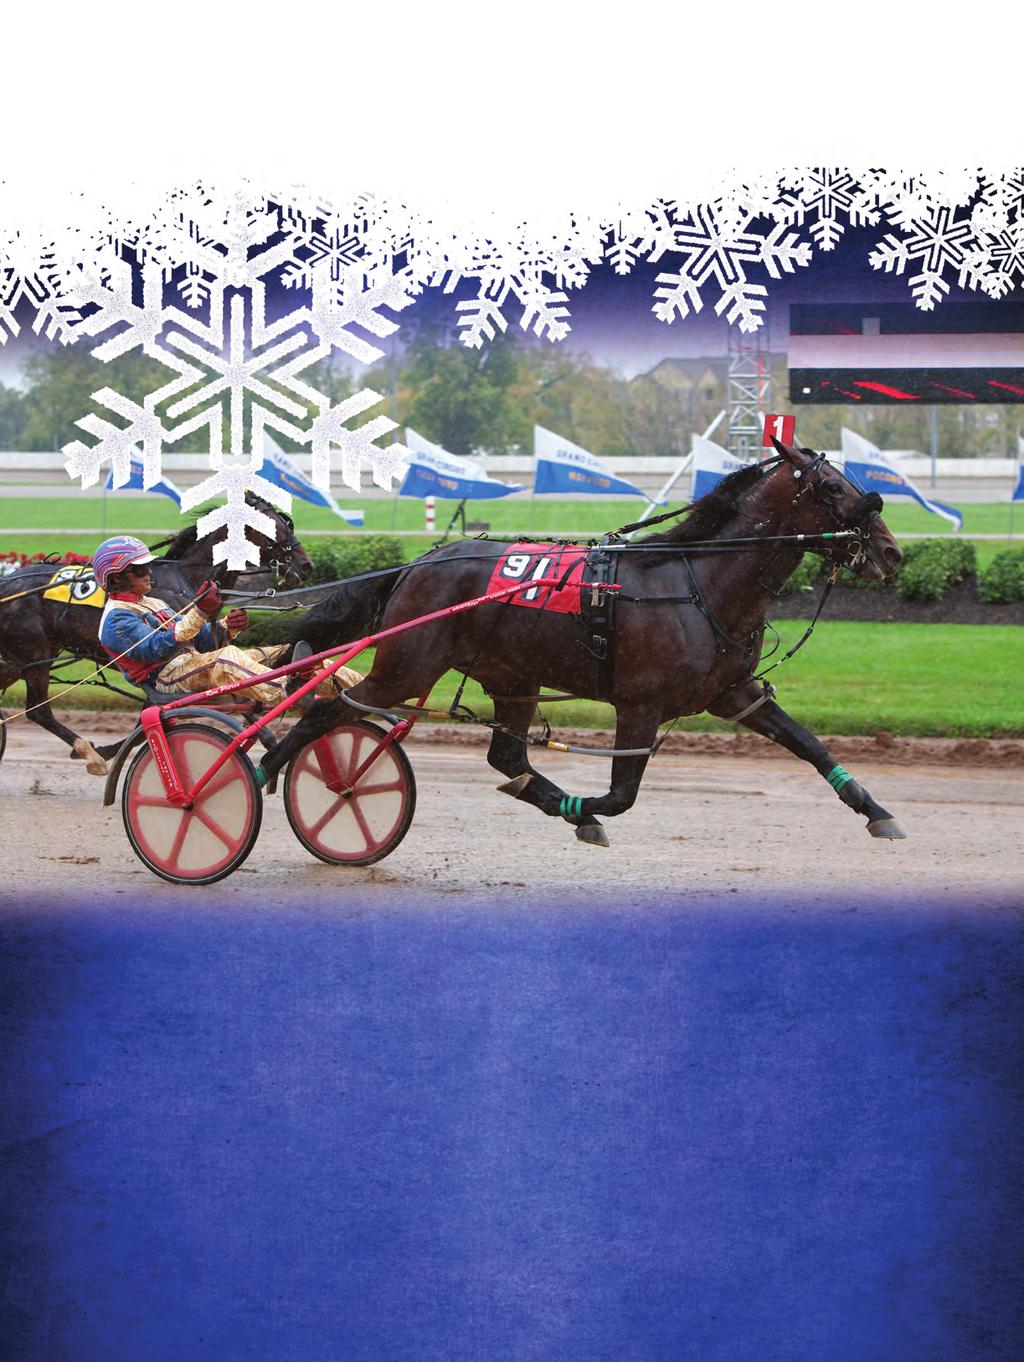 Holiday Season Our Best Wishes for the Photo by New Image Media ALL SPEED HANOVER A sincere thank you is extended to our many clients for your wonderful